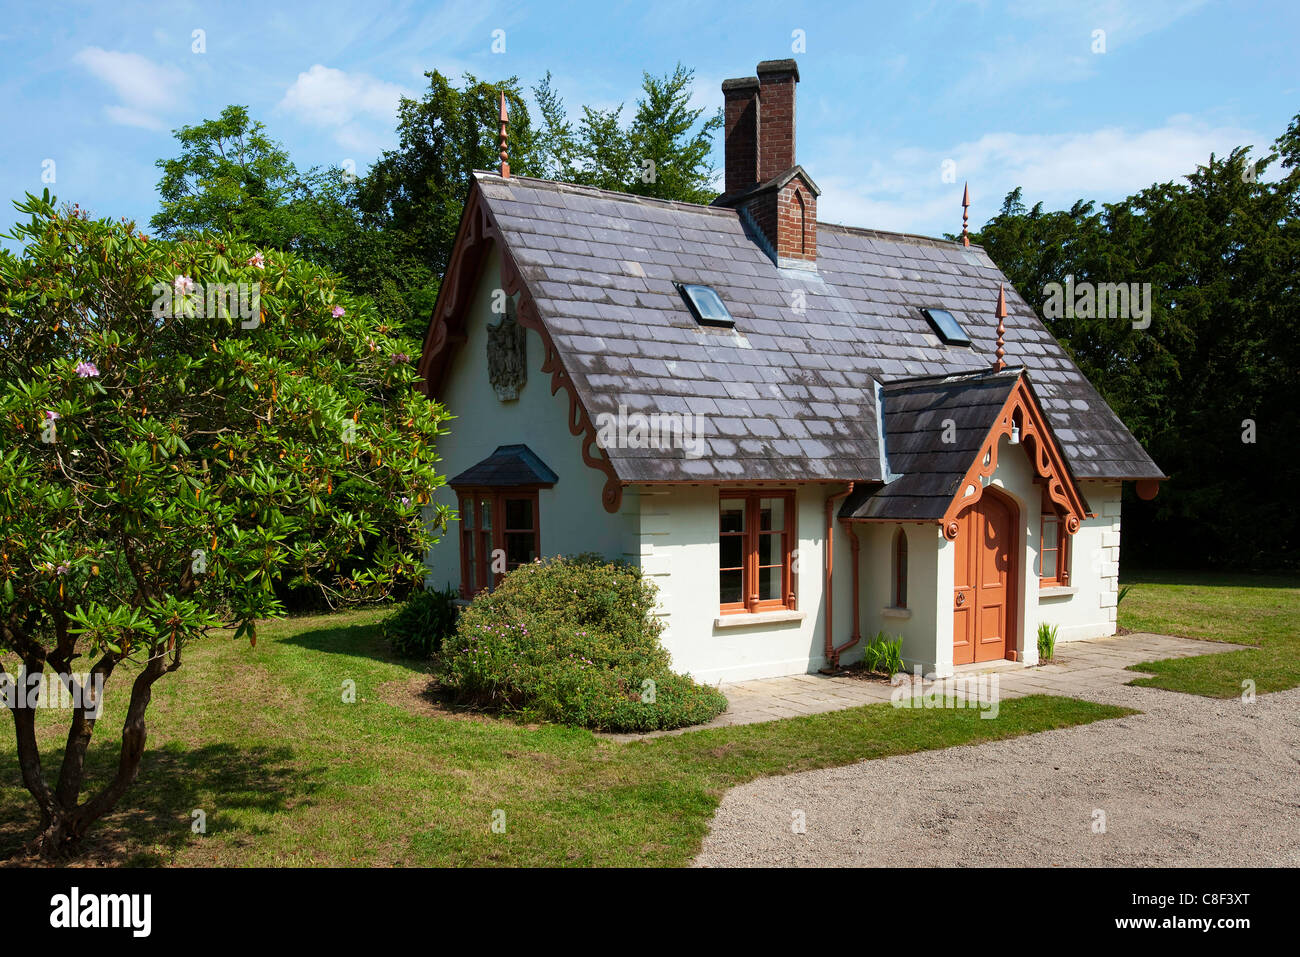 Small Irish Cottage Situated In A Wooden Area Stock Photo